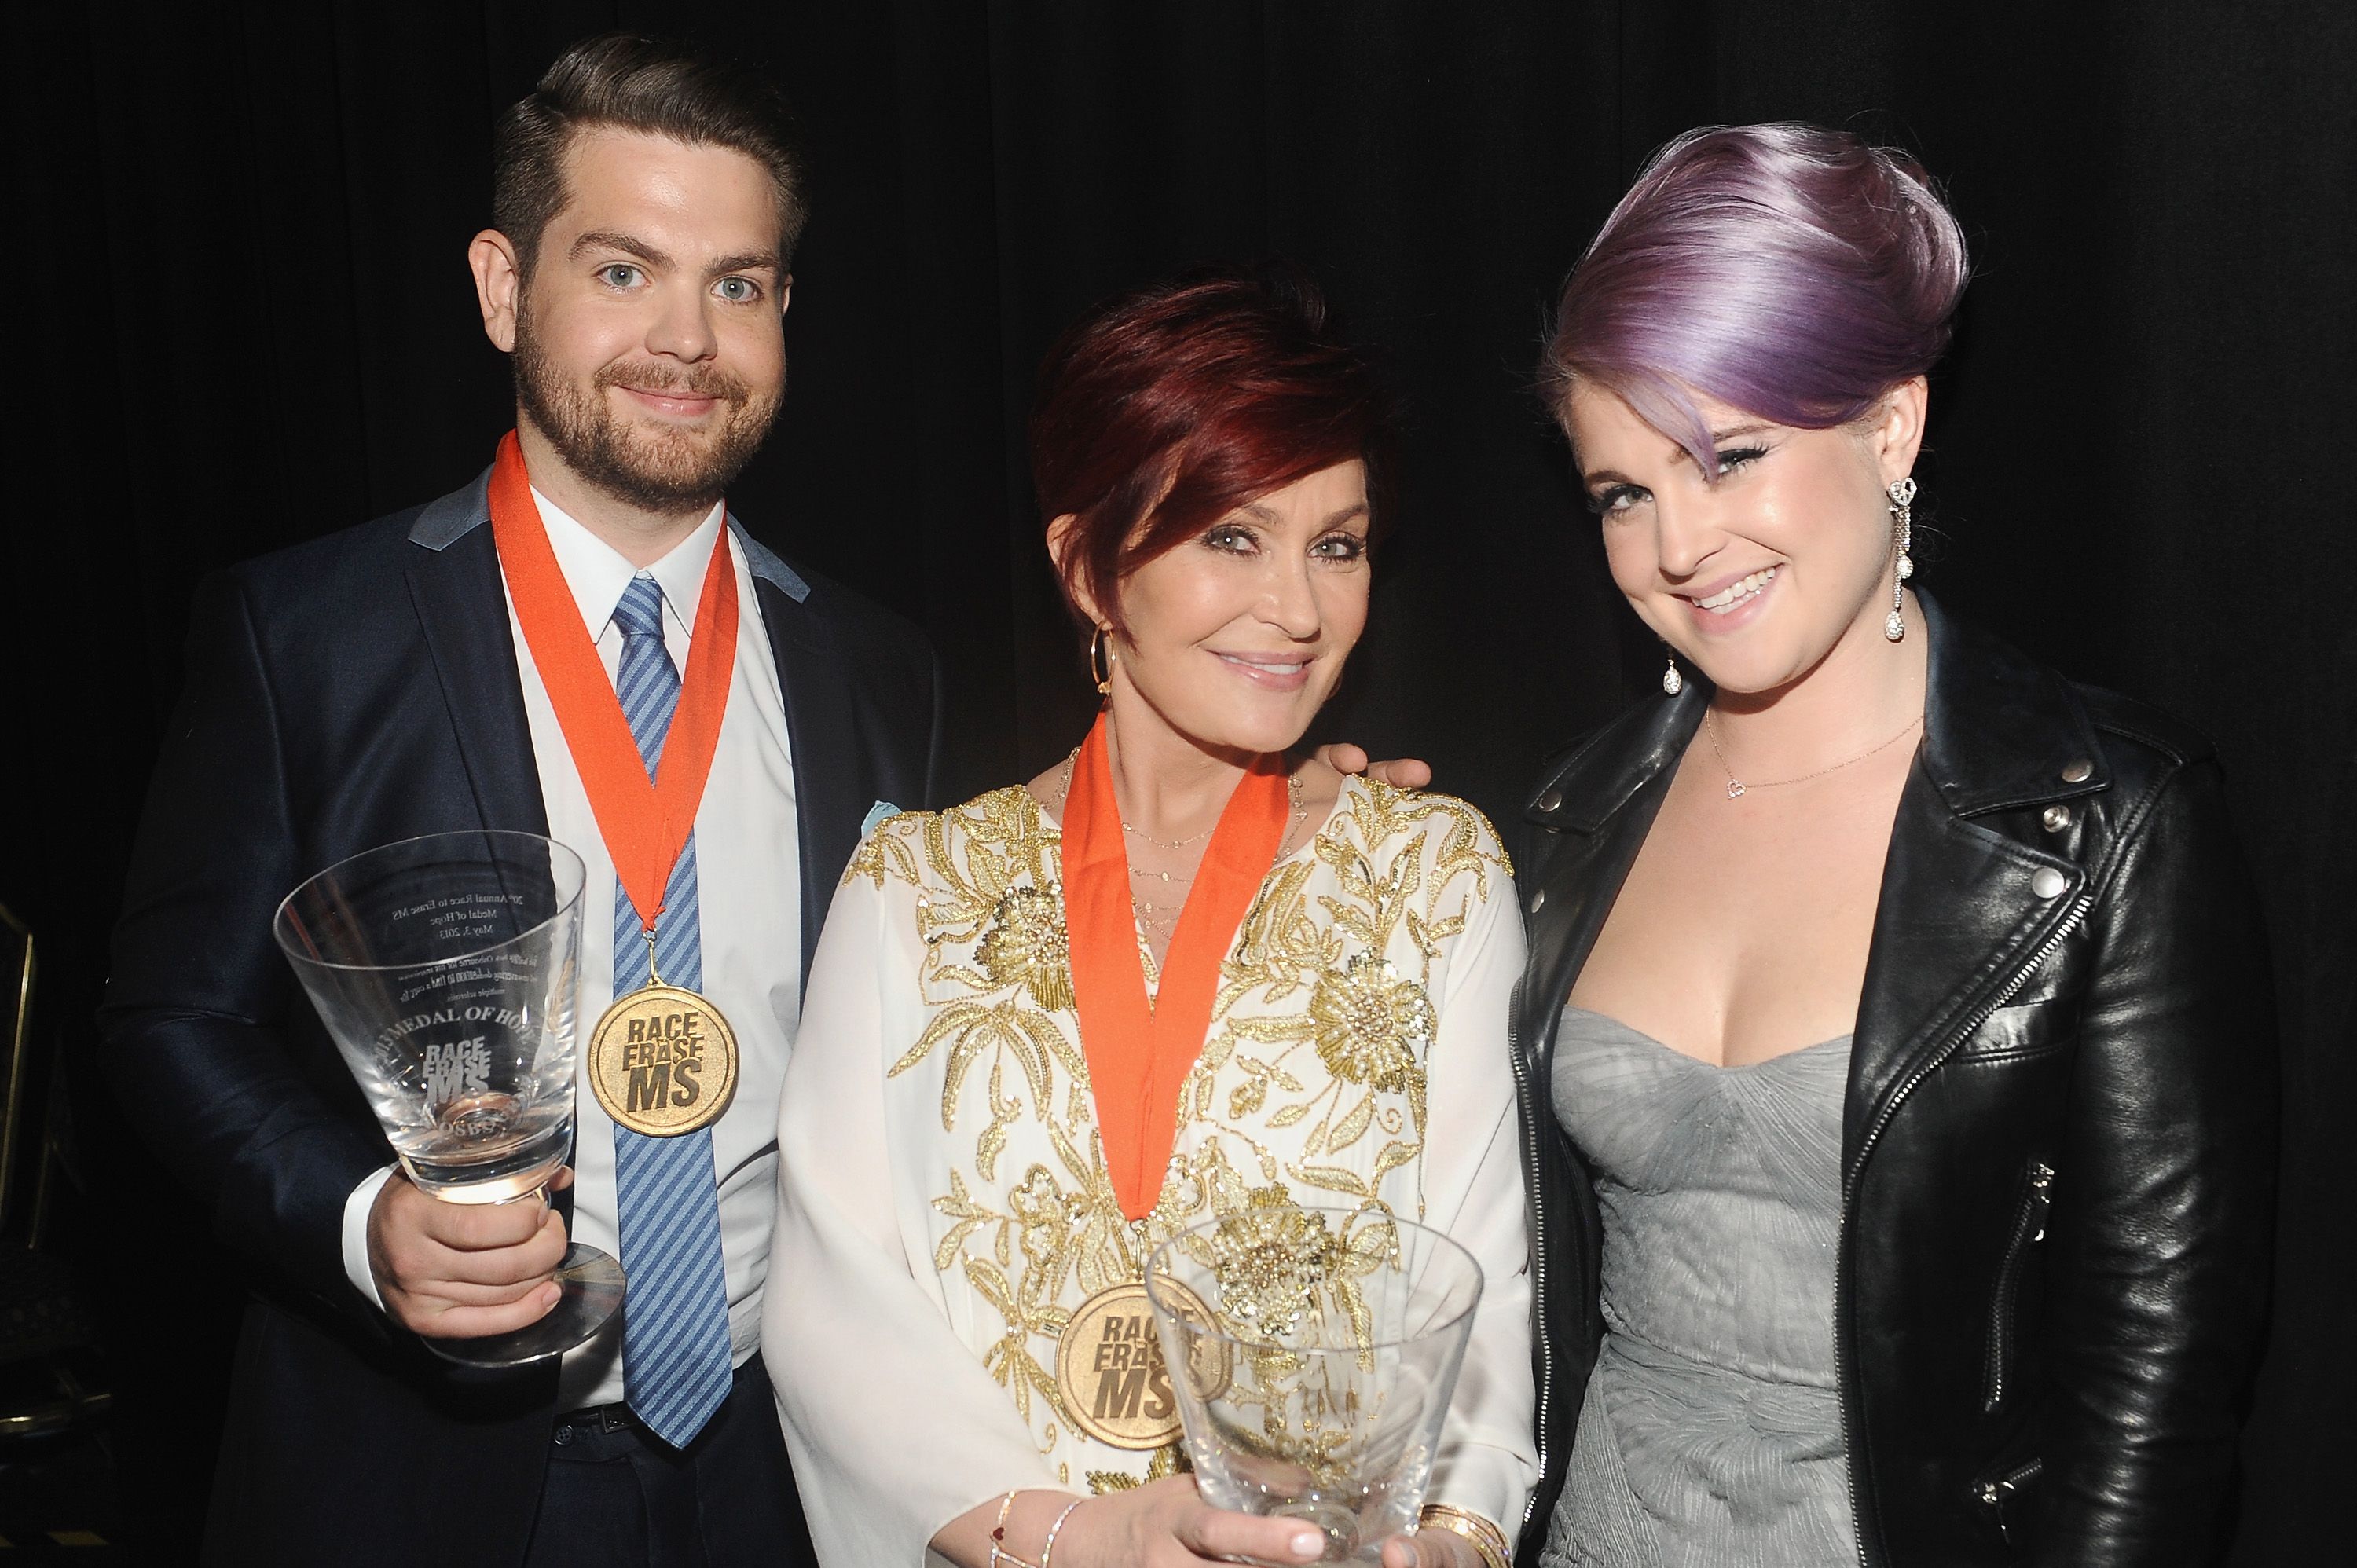 Kelly, Sharon, and Jack Osbourne during the 20th Annual Race To Erase MS Gala "Love To Erase MS" at the Hyatt Regency Century Plaza on May 3, 2013, in Century City, California. | Source: Getty Images